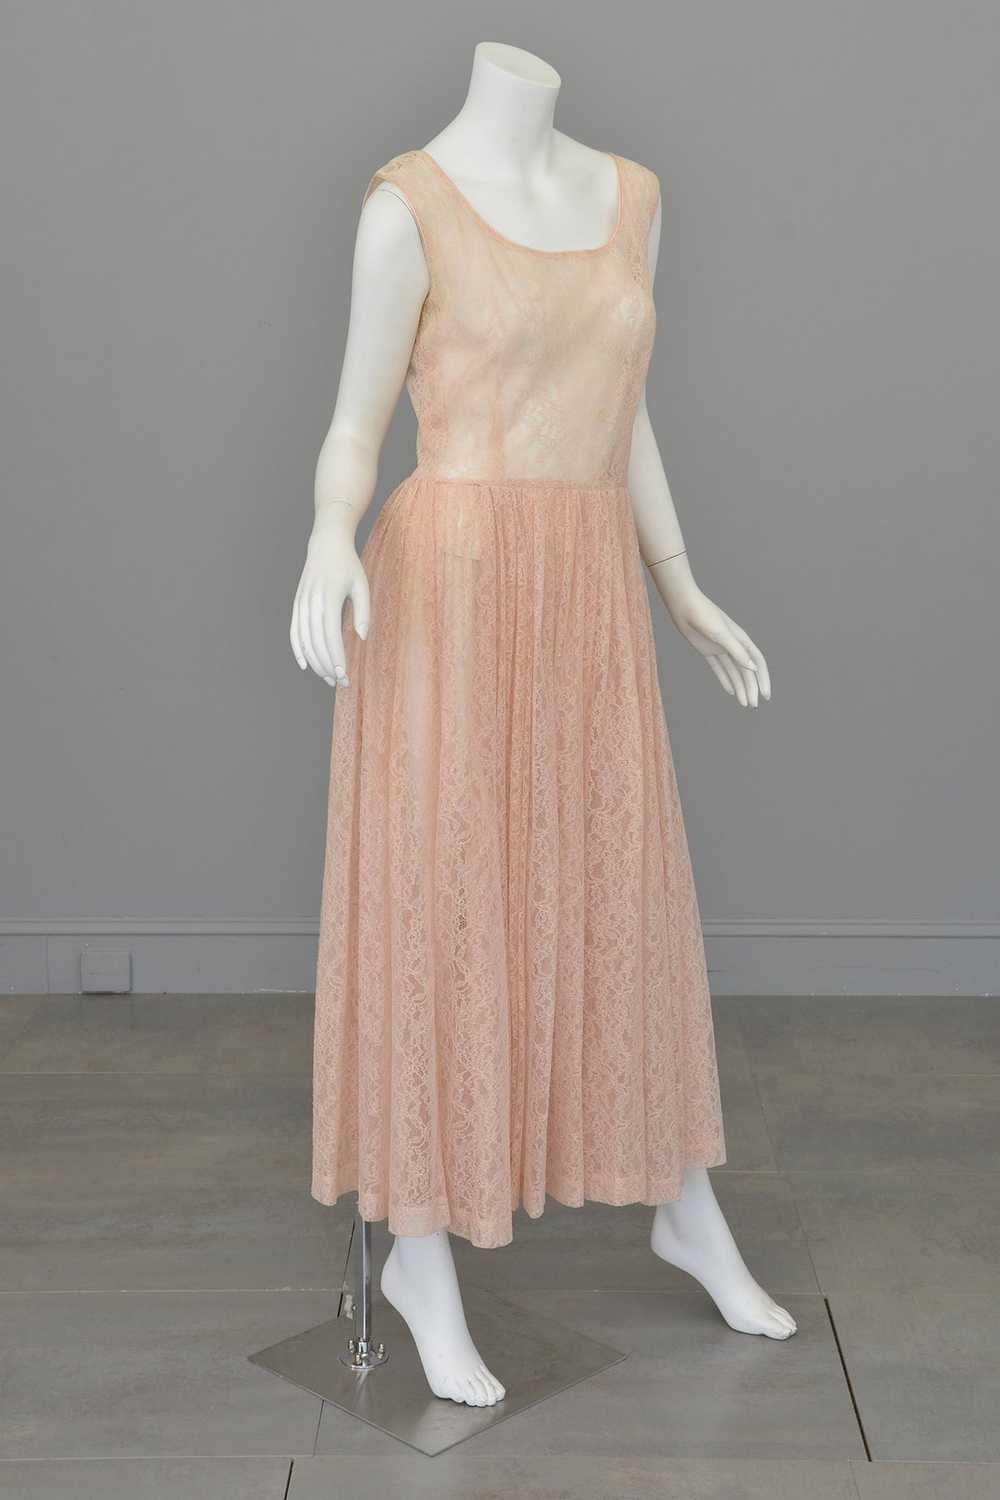 1940s 50s Sheer Light Pink Embroidered Lace Gown - image 3